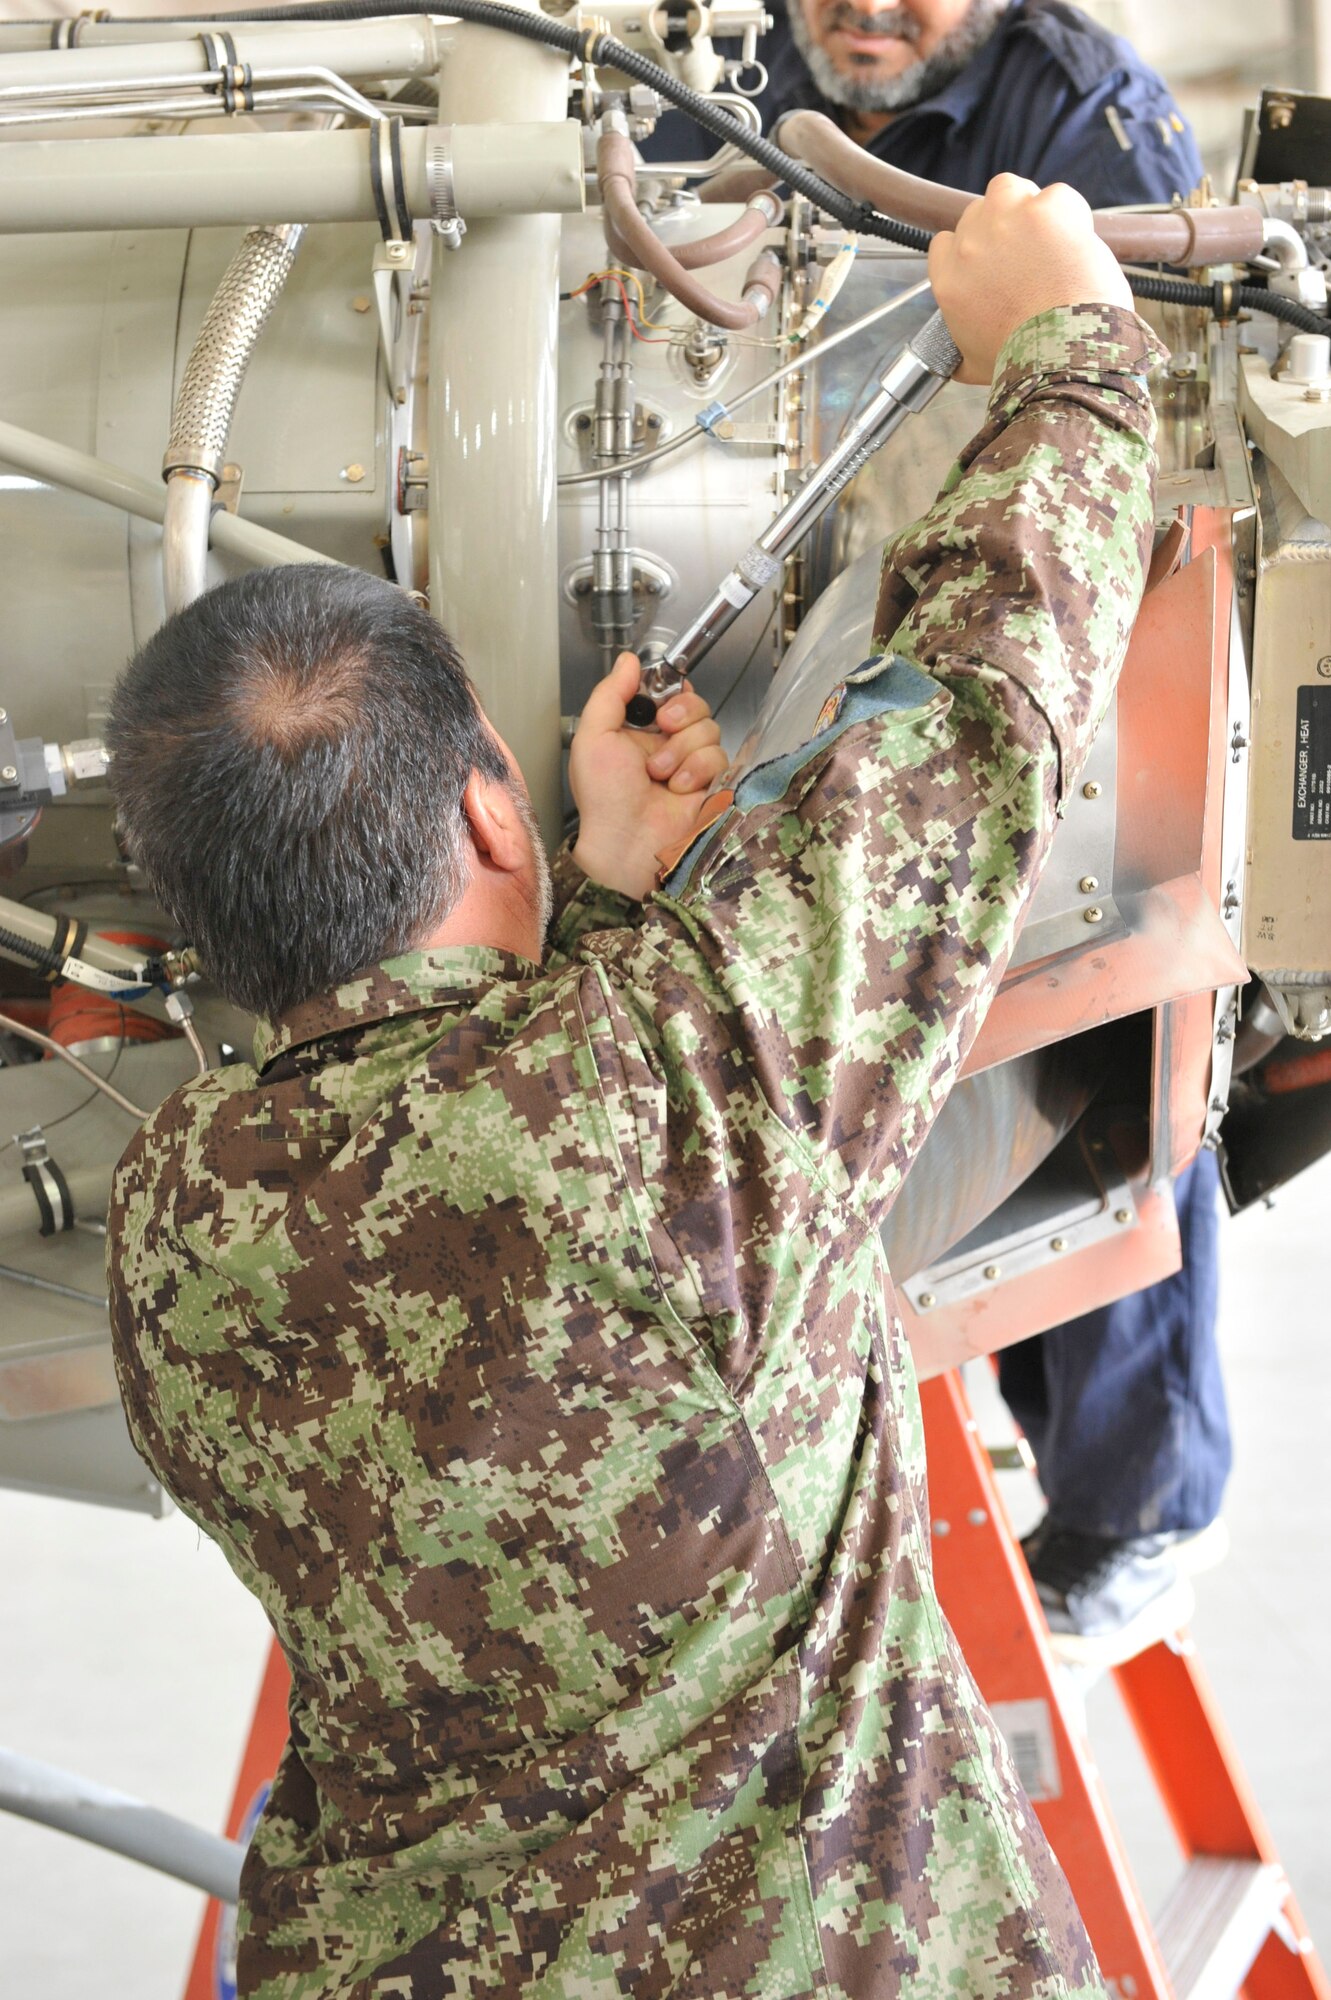 An Afghan aviation maintenance student uses a torque wrench on a Cessna 208 engine while being monitored by an Afghan crew chief during training at Shindand Airfield, Afghanistan, March 9, 2014. U.S. military advisors are training Afghan military members to fly and maintain aircraft at Shindand.(U.S. Air Force photo by Senior Master Sgt. Gary J. Rihn)